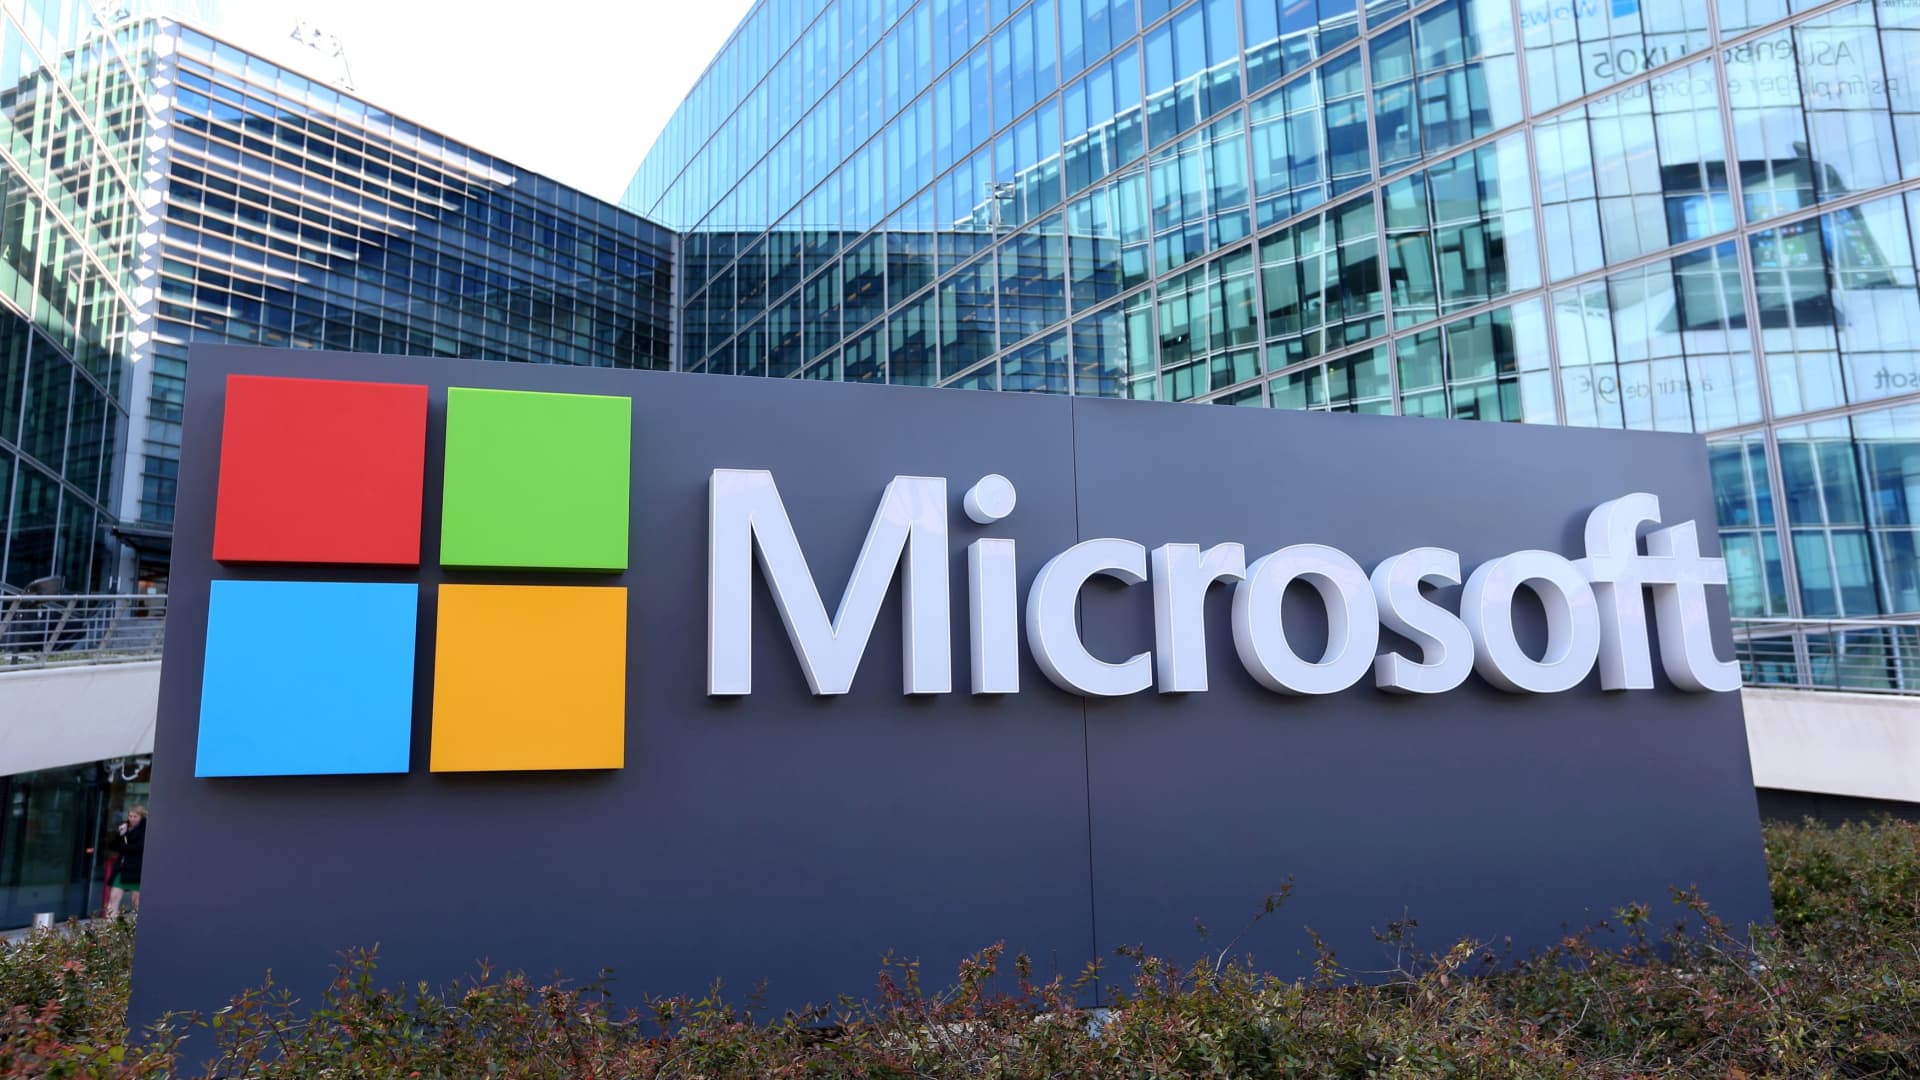 Stocks making the biggest moves midday: Microsoft, Moderna, Mobileye, Chegg and more